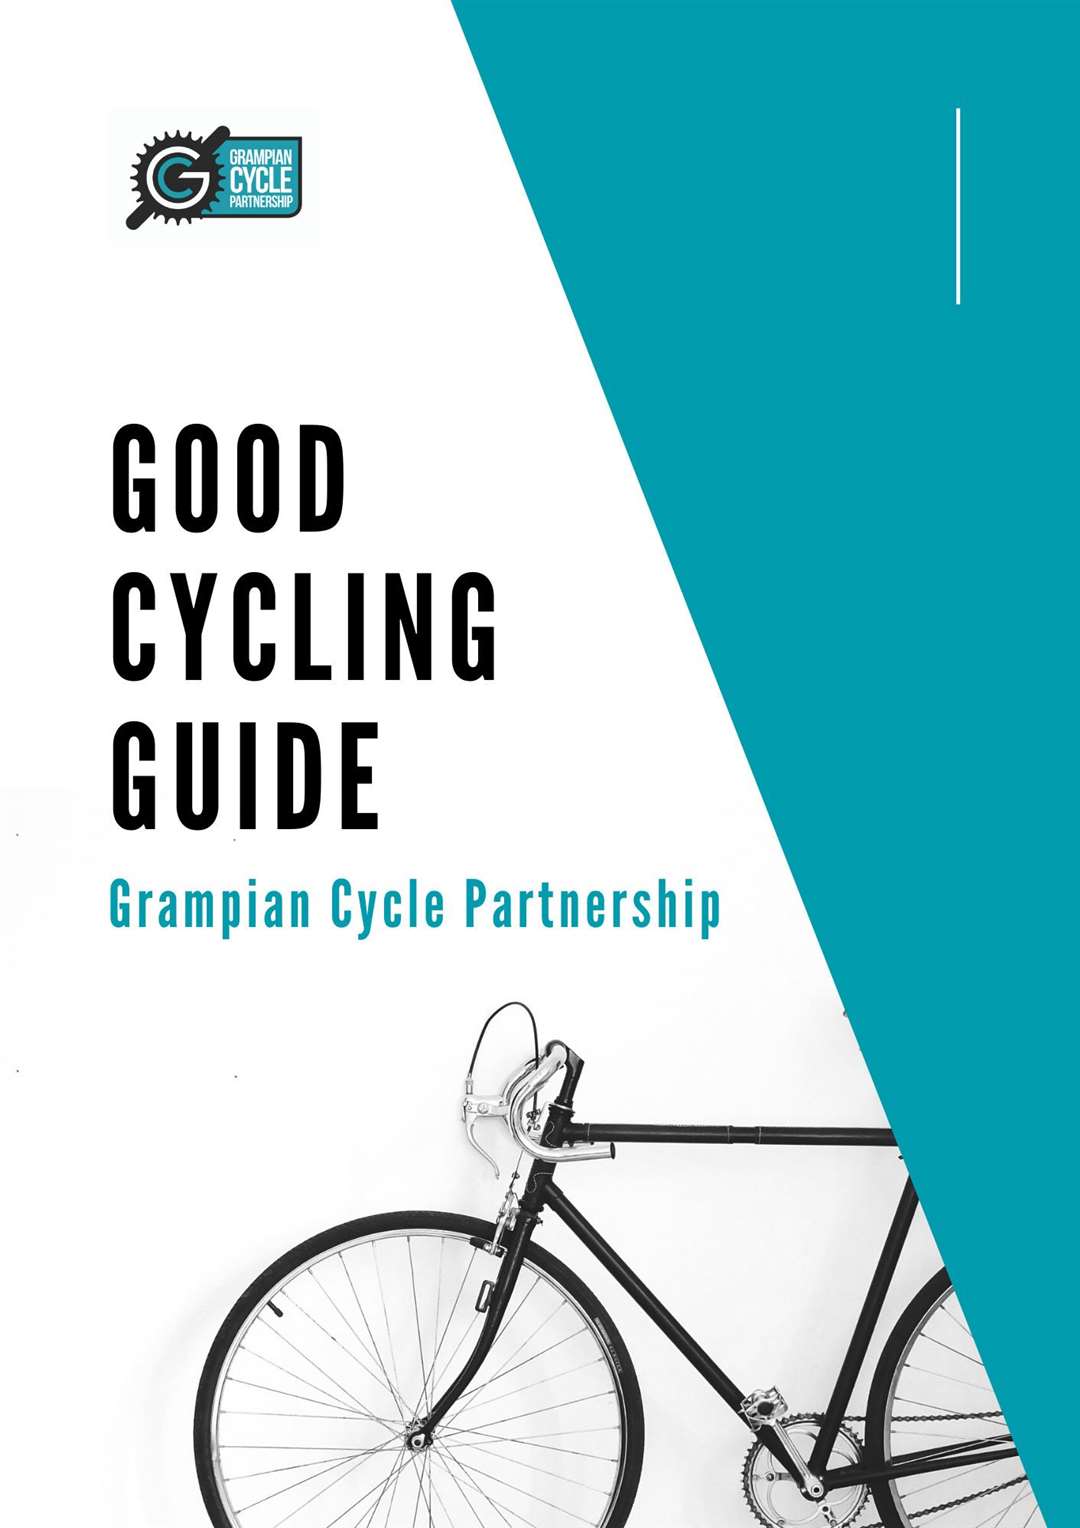 The Good Cycling Guide has been published by the Grampian Cycle Partnership.